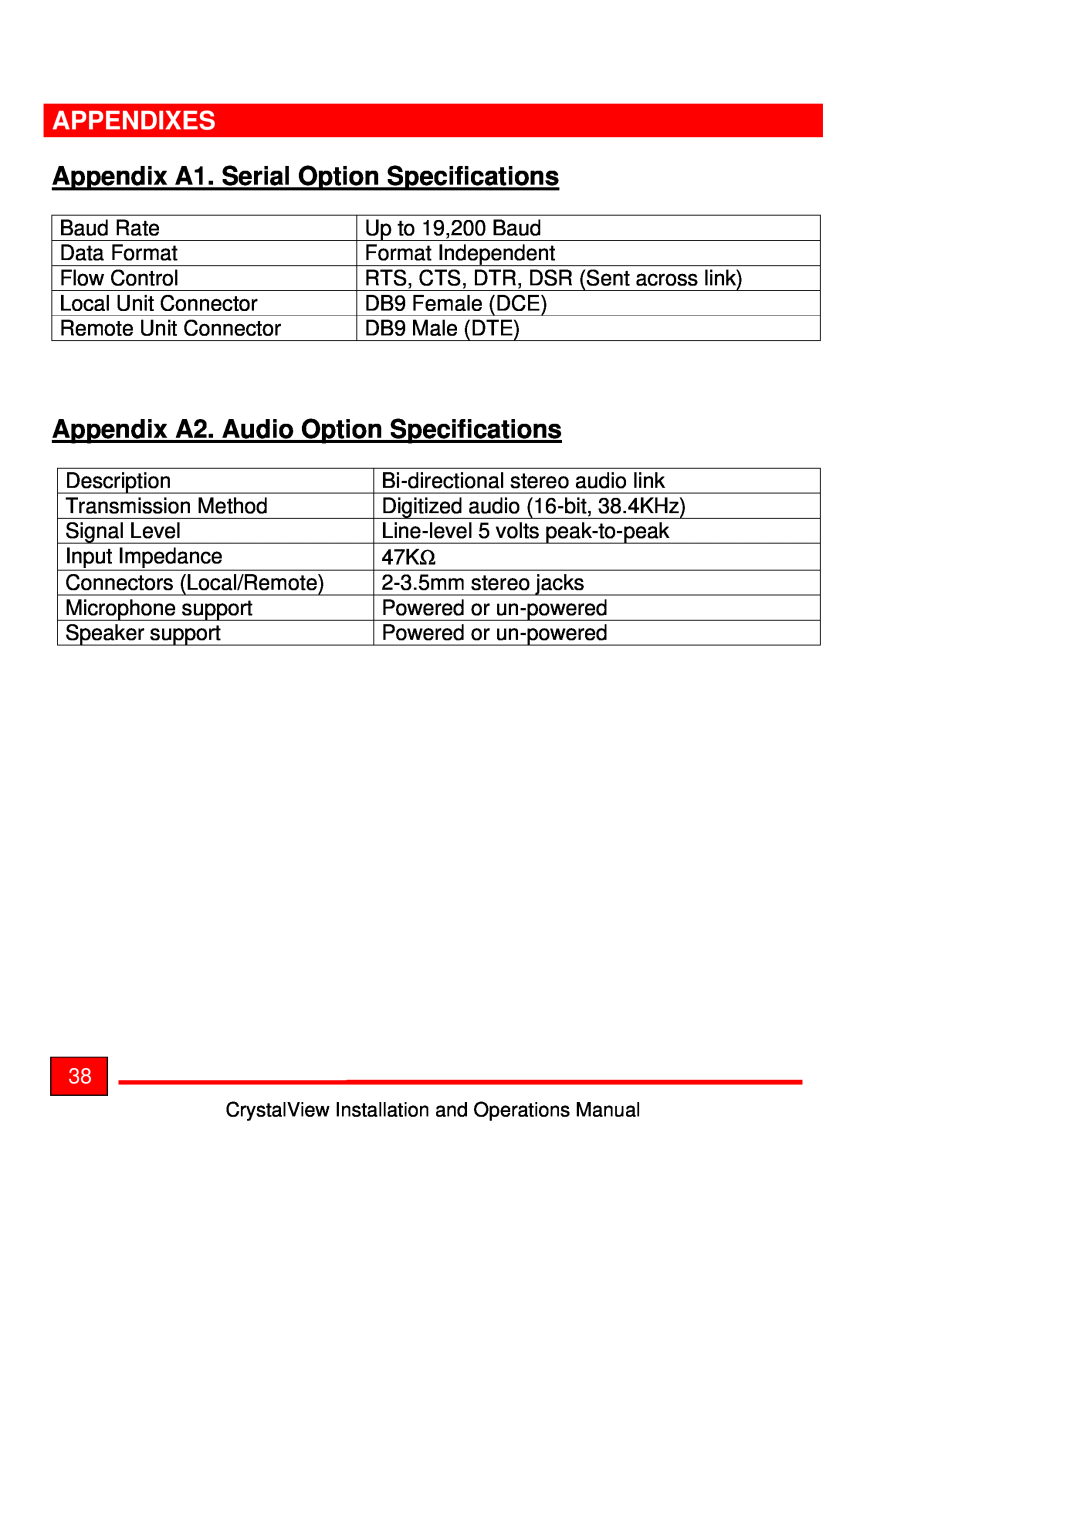 Rose electronic Crystal View Appendix A1. Serial Option Specifications, Appendix A2. Audio Option Specifications 